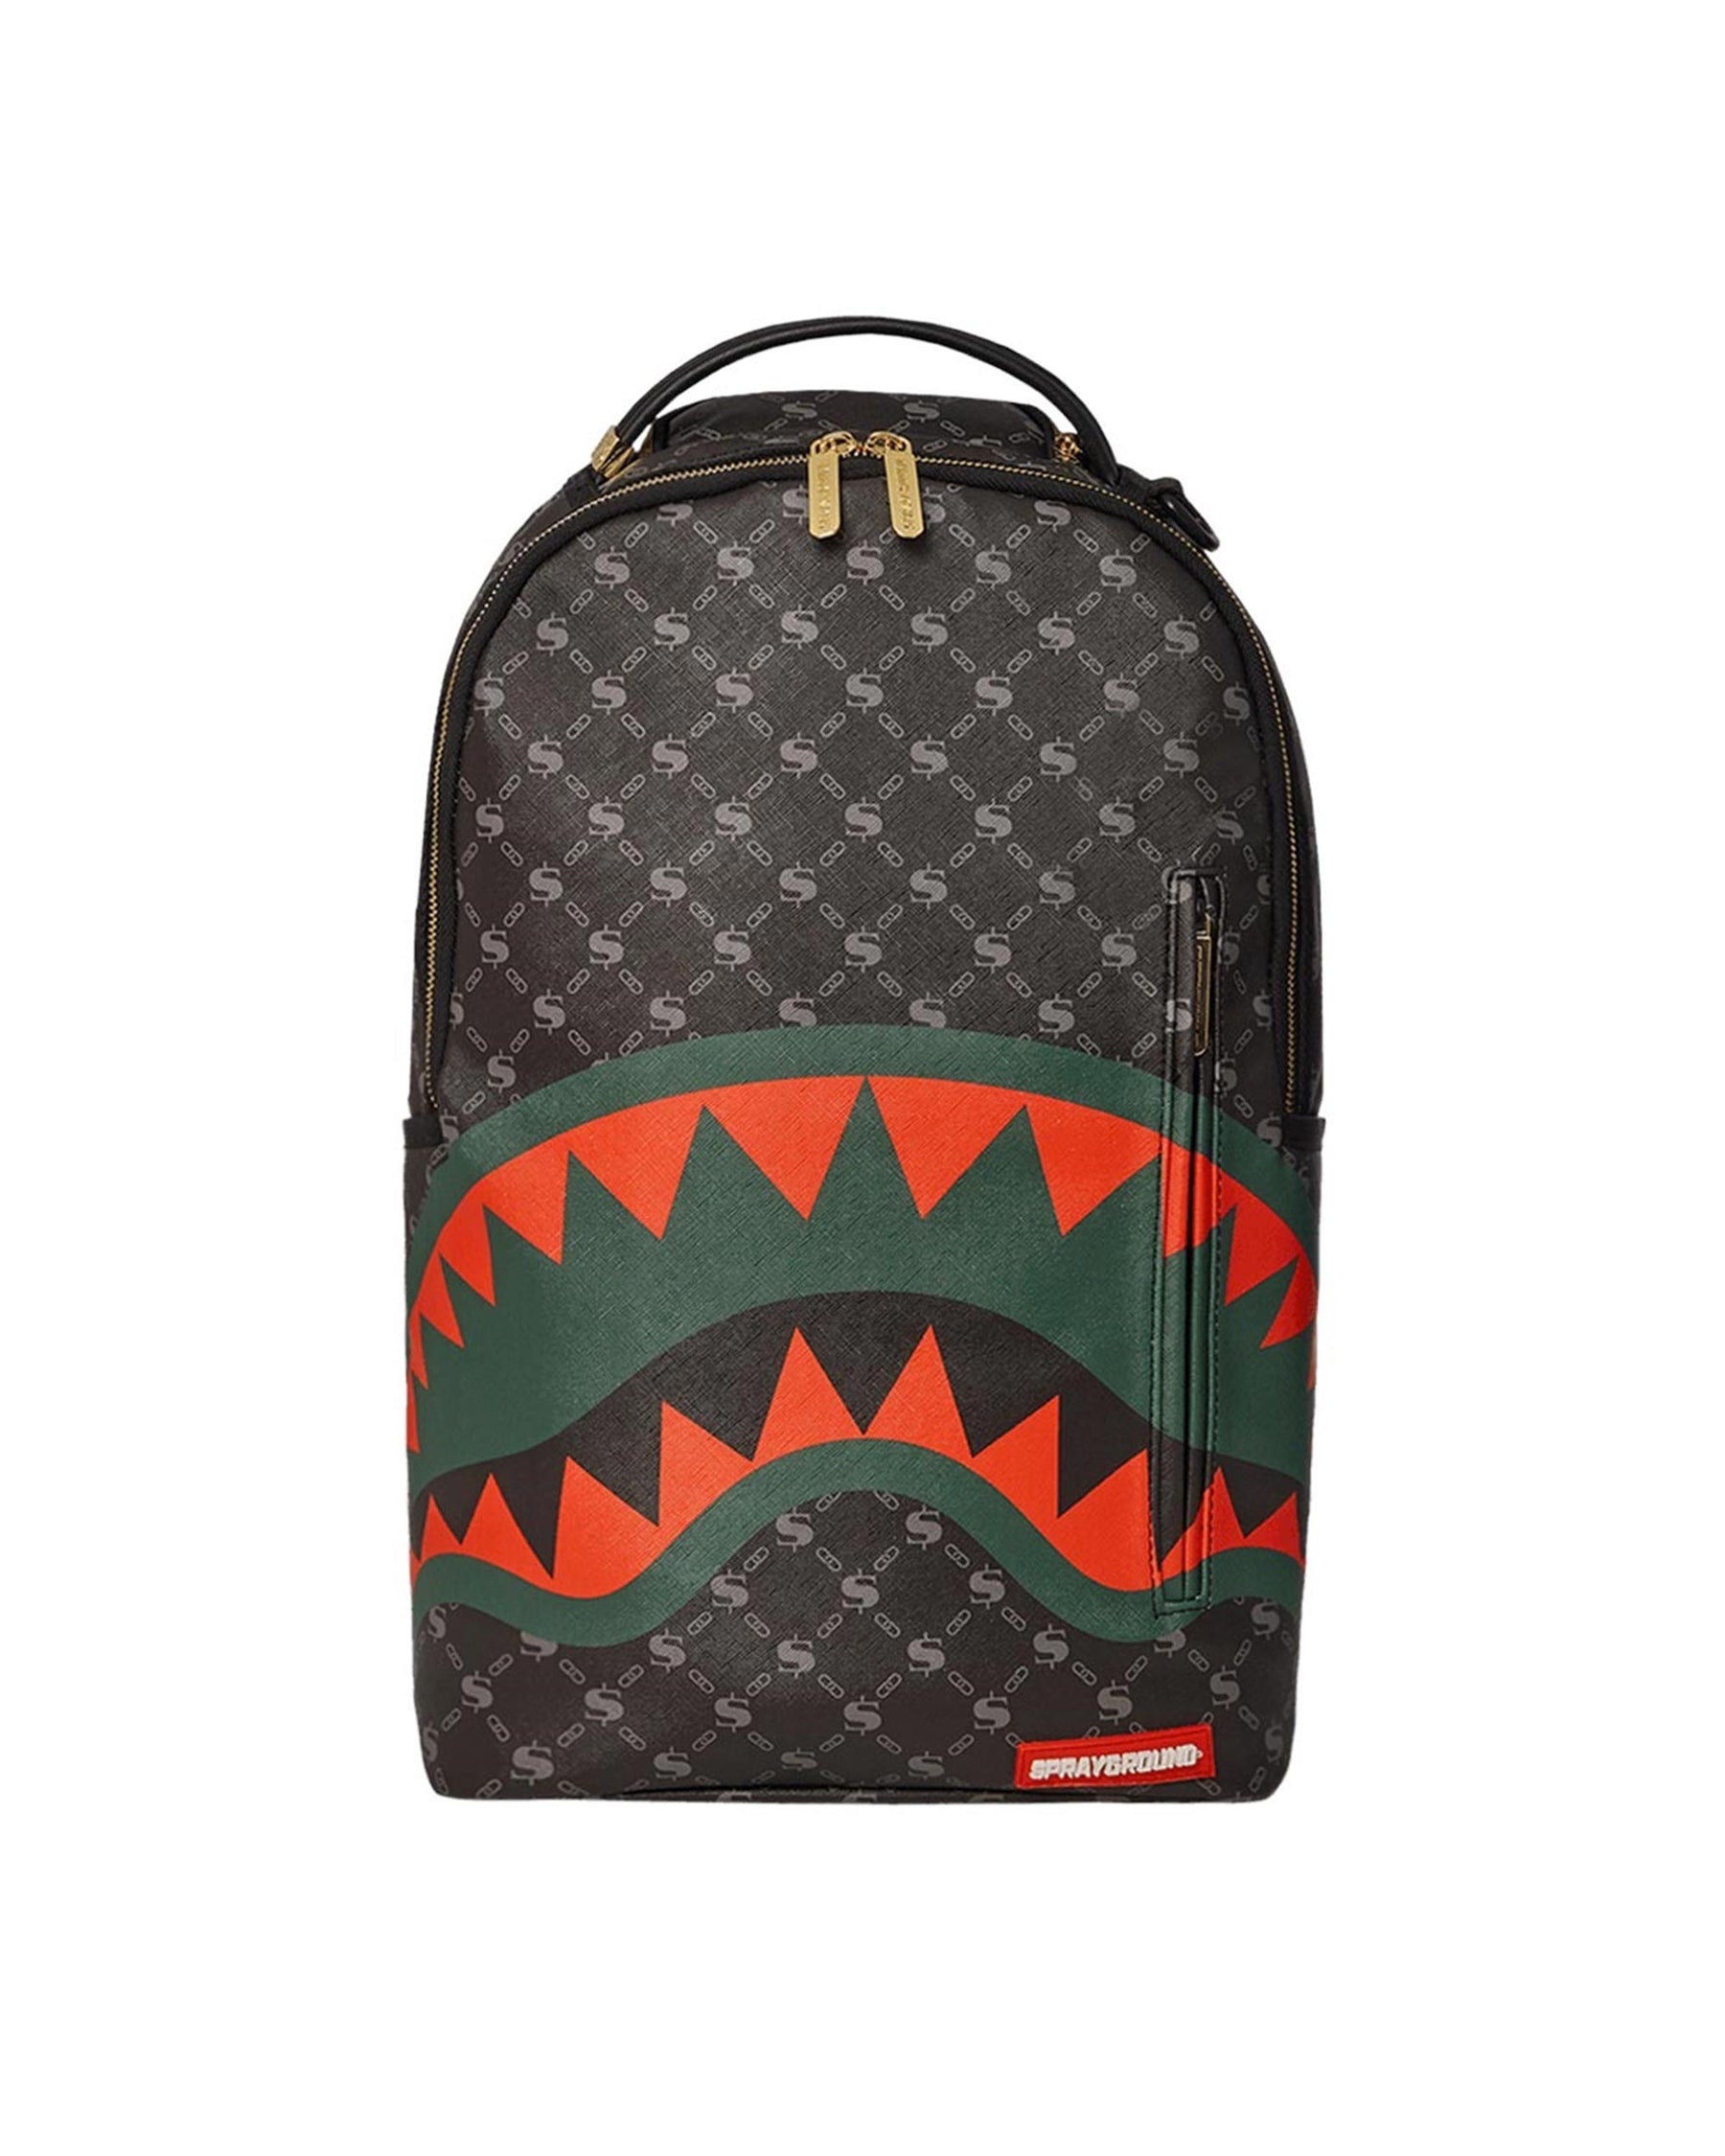 The Godfather DLX Backpack 910B3594NSZ